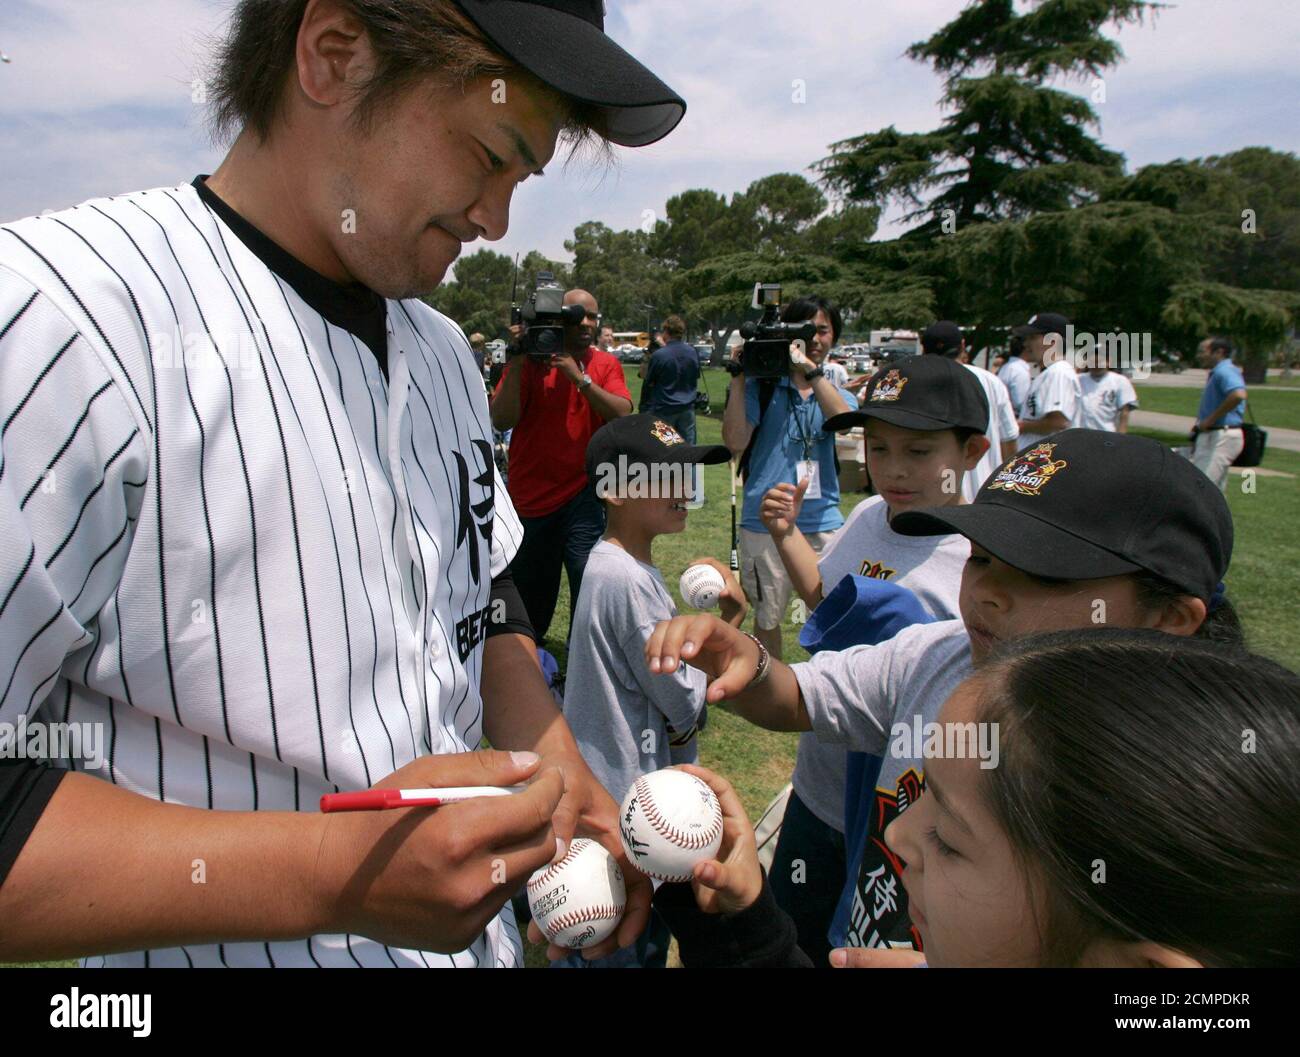 Japan Samurai Bears outfielder Kazuhiro Kono, who played baseball in high school with New York Yankees slugger Hideki Matsui, signs autographs during the Bears baseball clinic in Los Angeles, May 17, 2005. The Samurai Bears will be the first all Japanese team to participate in a U.S. professional sports league when they begin their 90-game season in the independent Golden Baseball League in California and Arizona. REUTERS/Lucy Nicholson   LN/HK Stock Photo